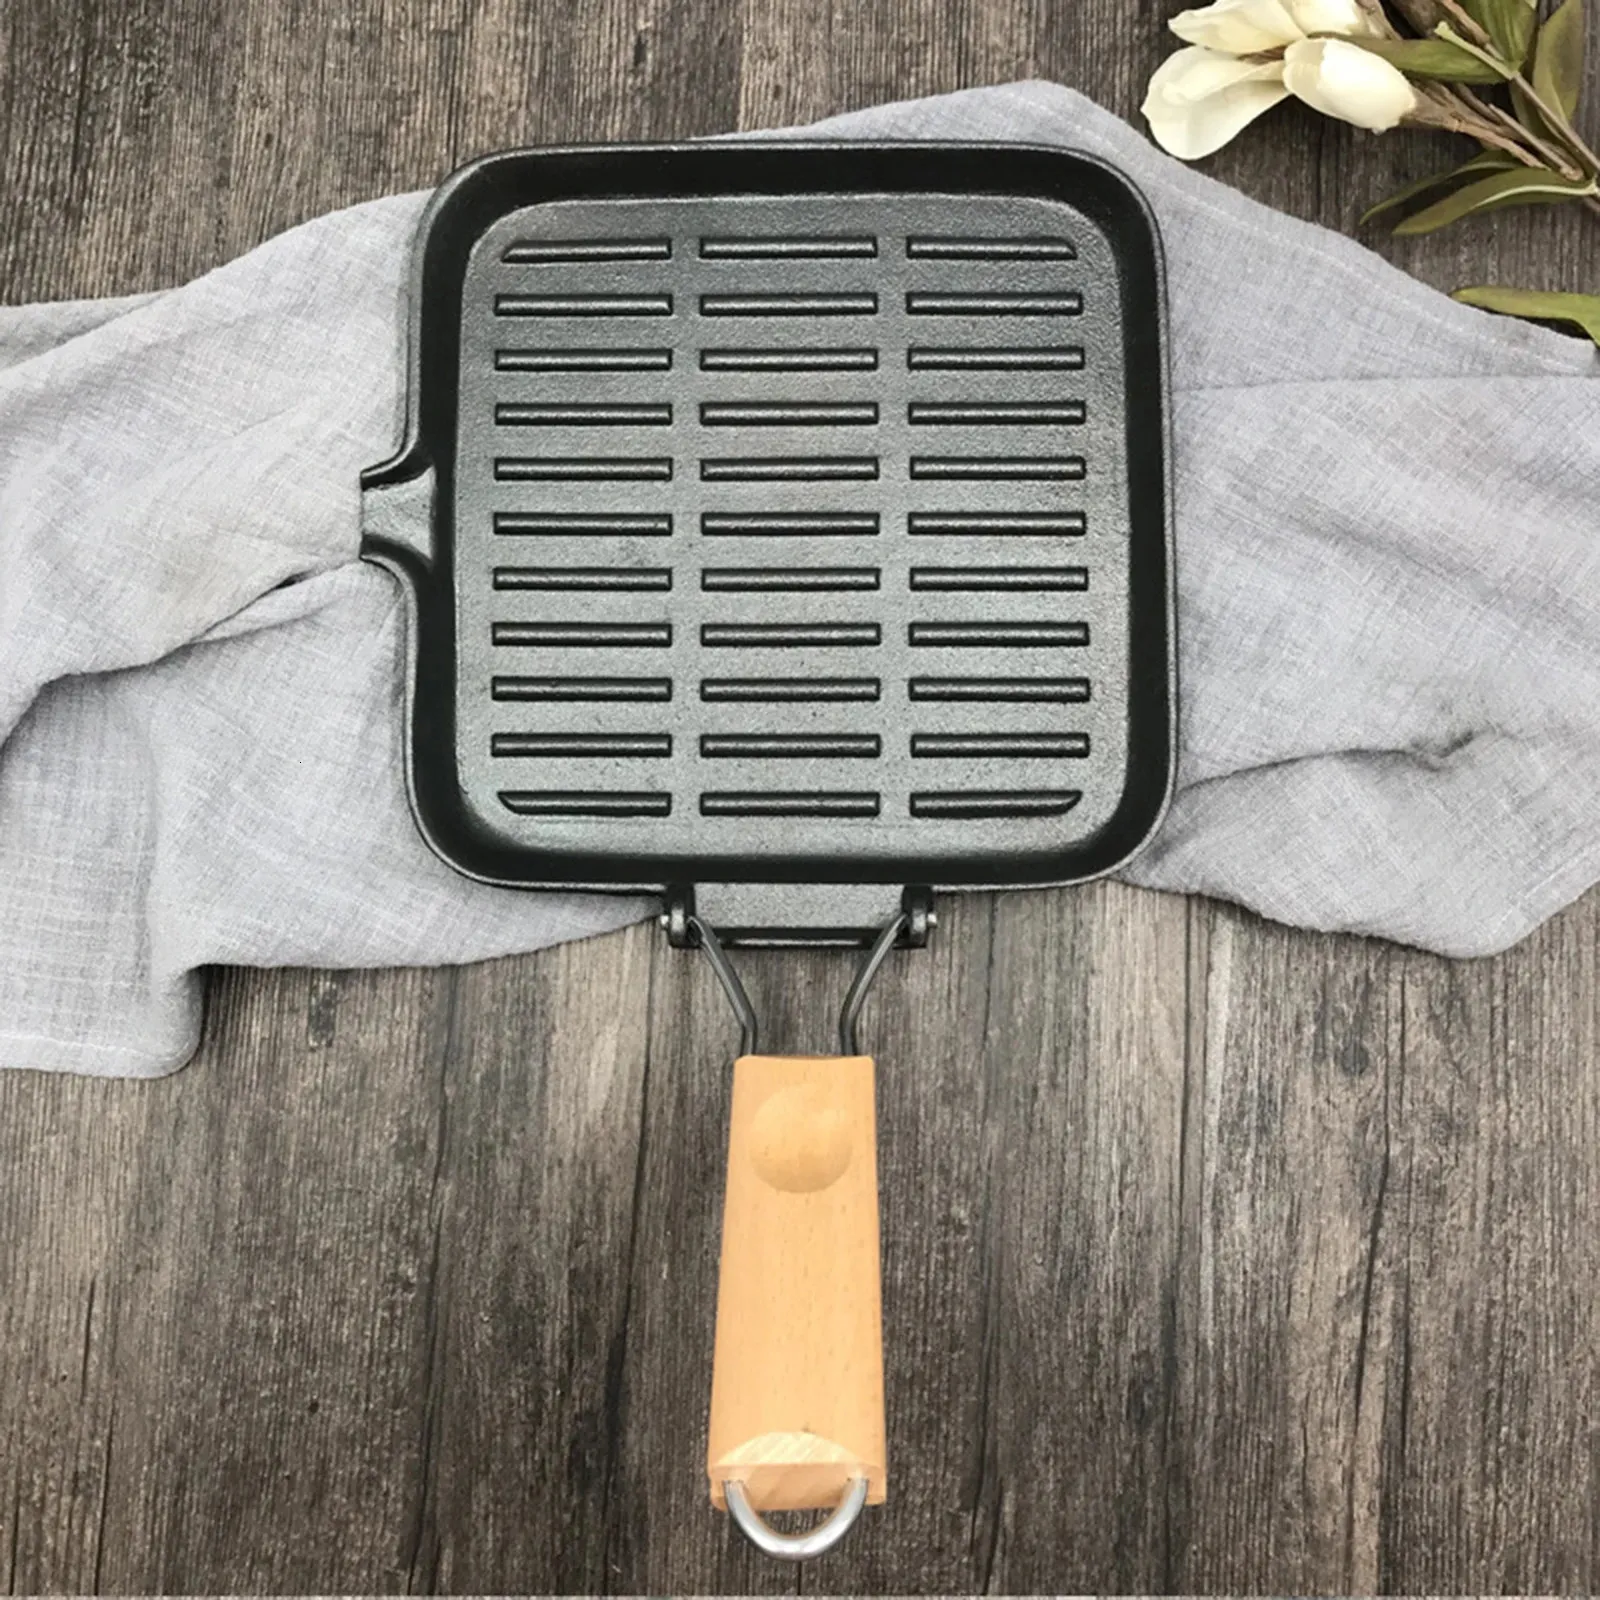 22cm Cast Iron Steak Camping Griddle Frying Pan BBQ Non-stick Easy Clean Kitchen Cookware Supplies Foldable Skillet Pan Picnic